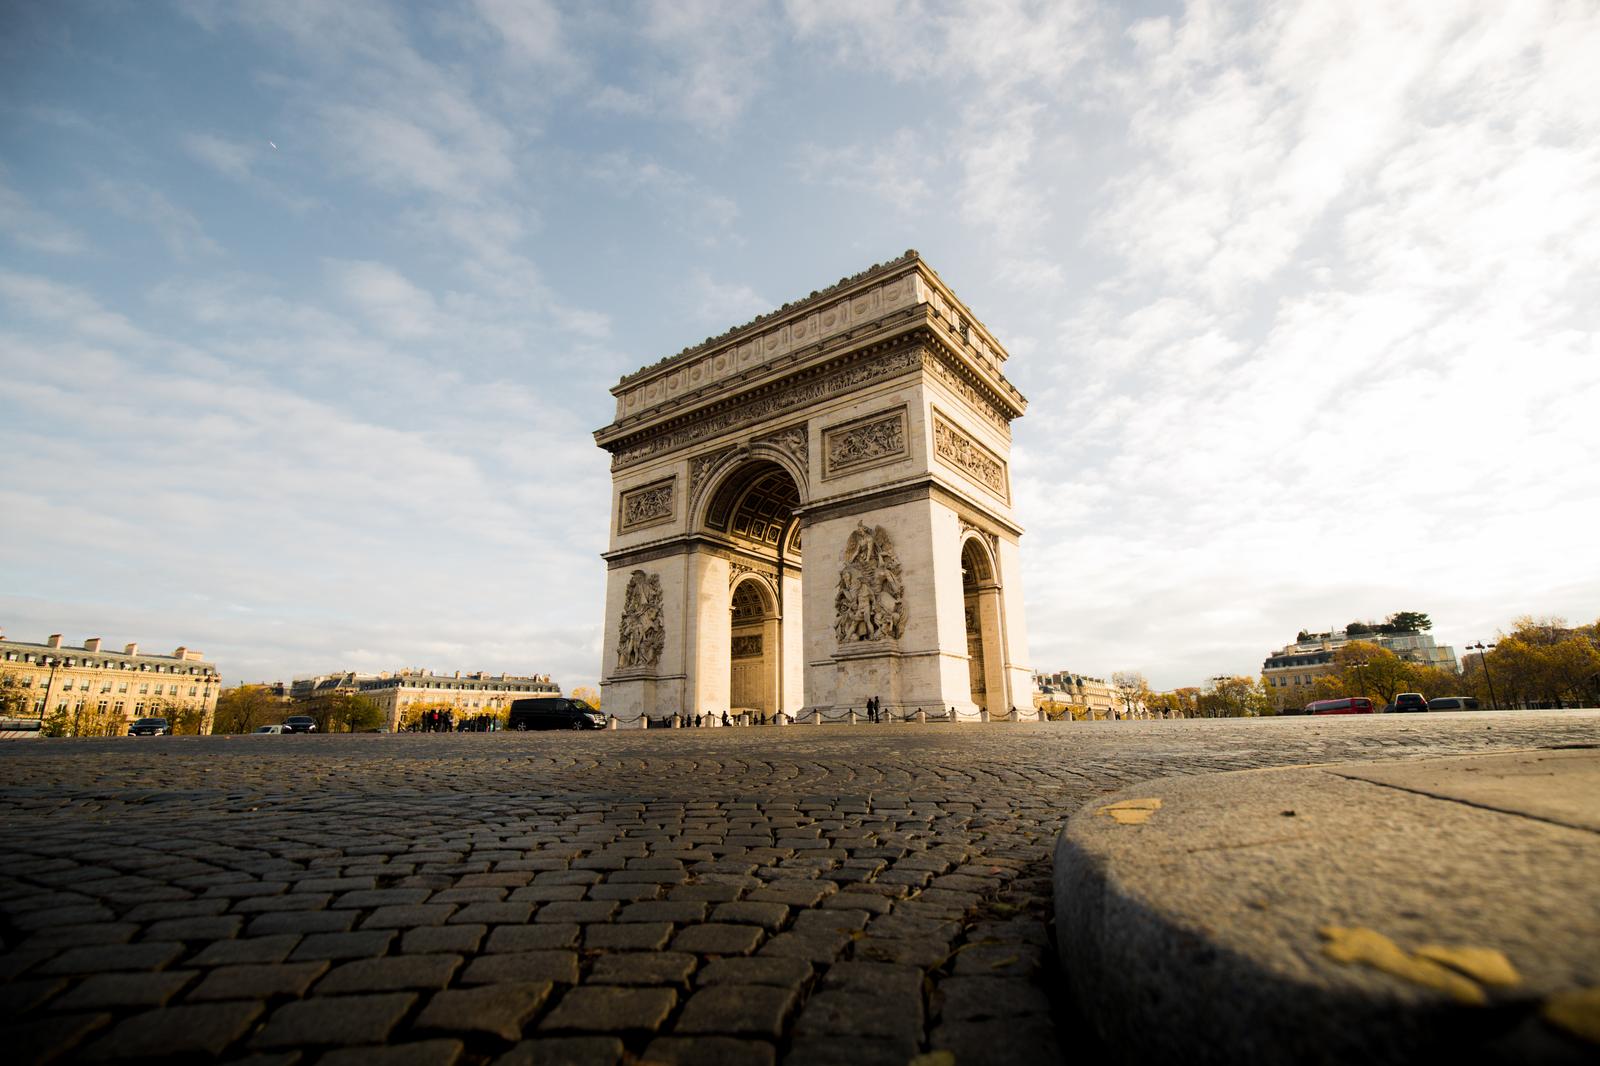 Name That City! Put Your Travel Knowledge to Test With This Picture Quiz! Arc de Triomphe, Paris, France